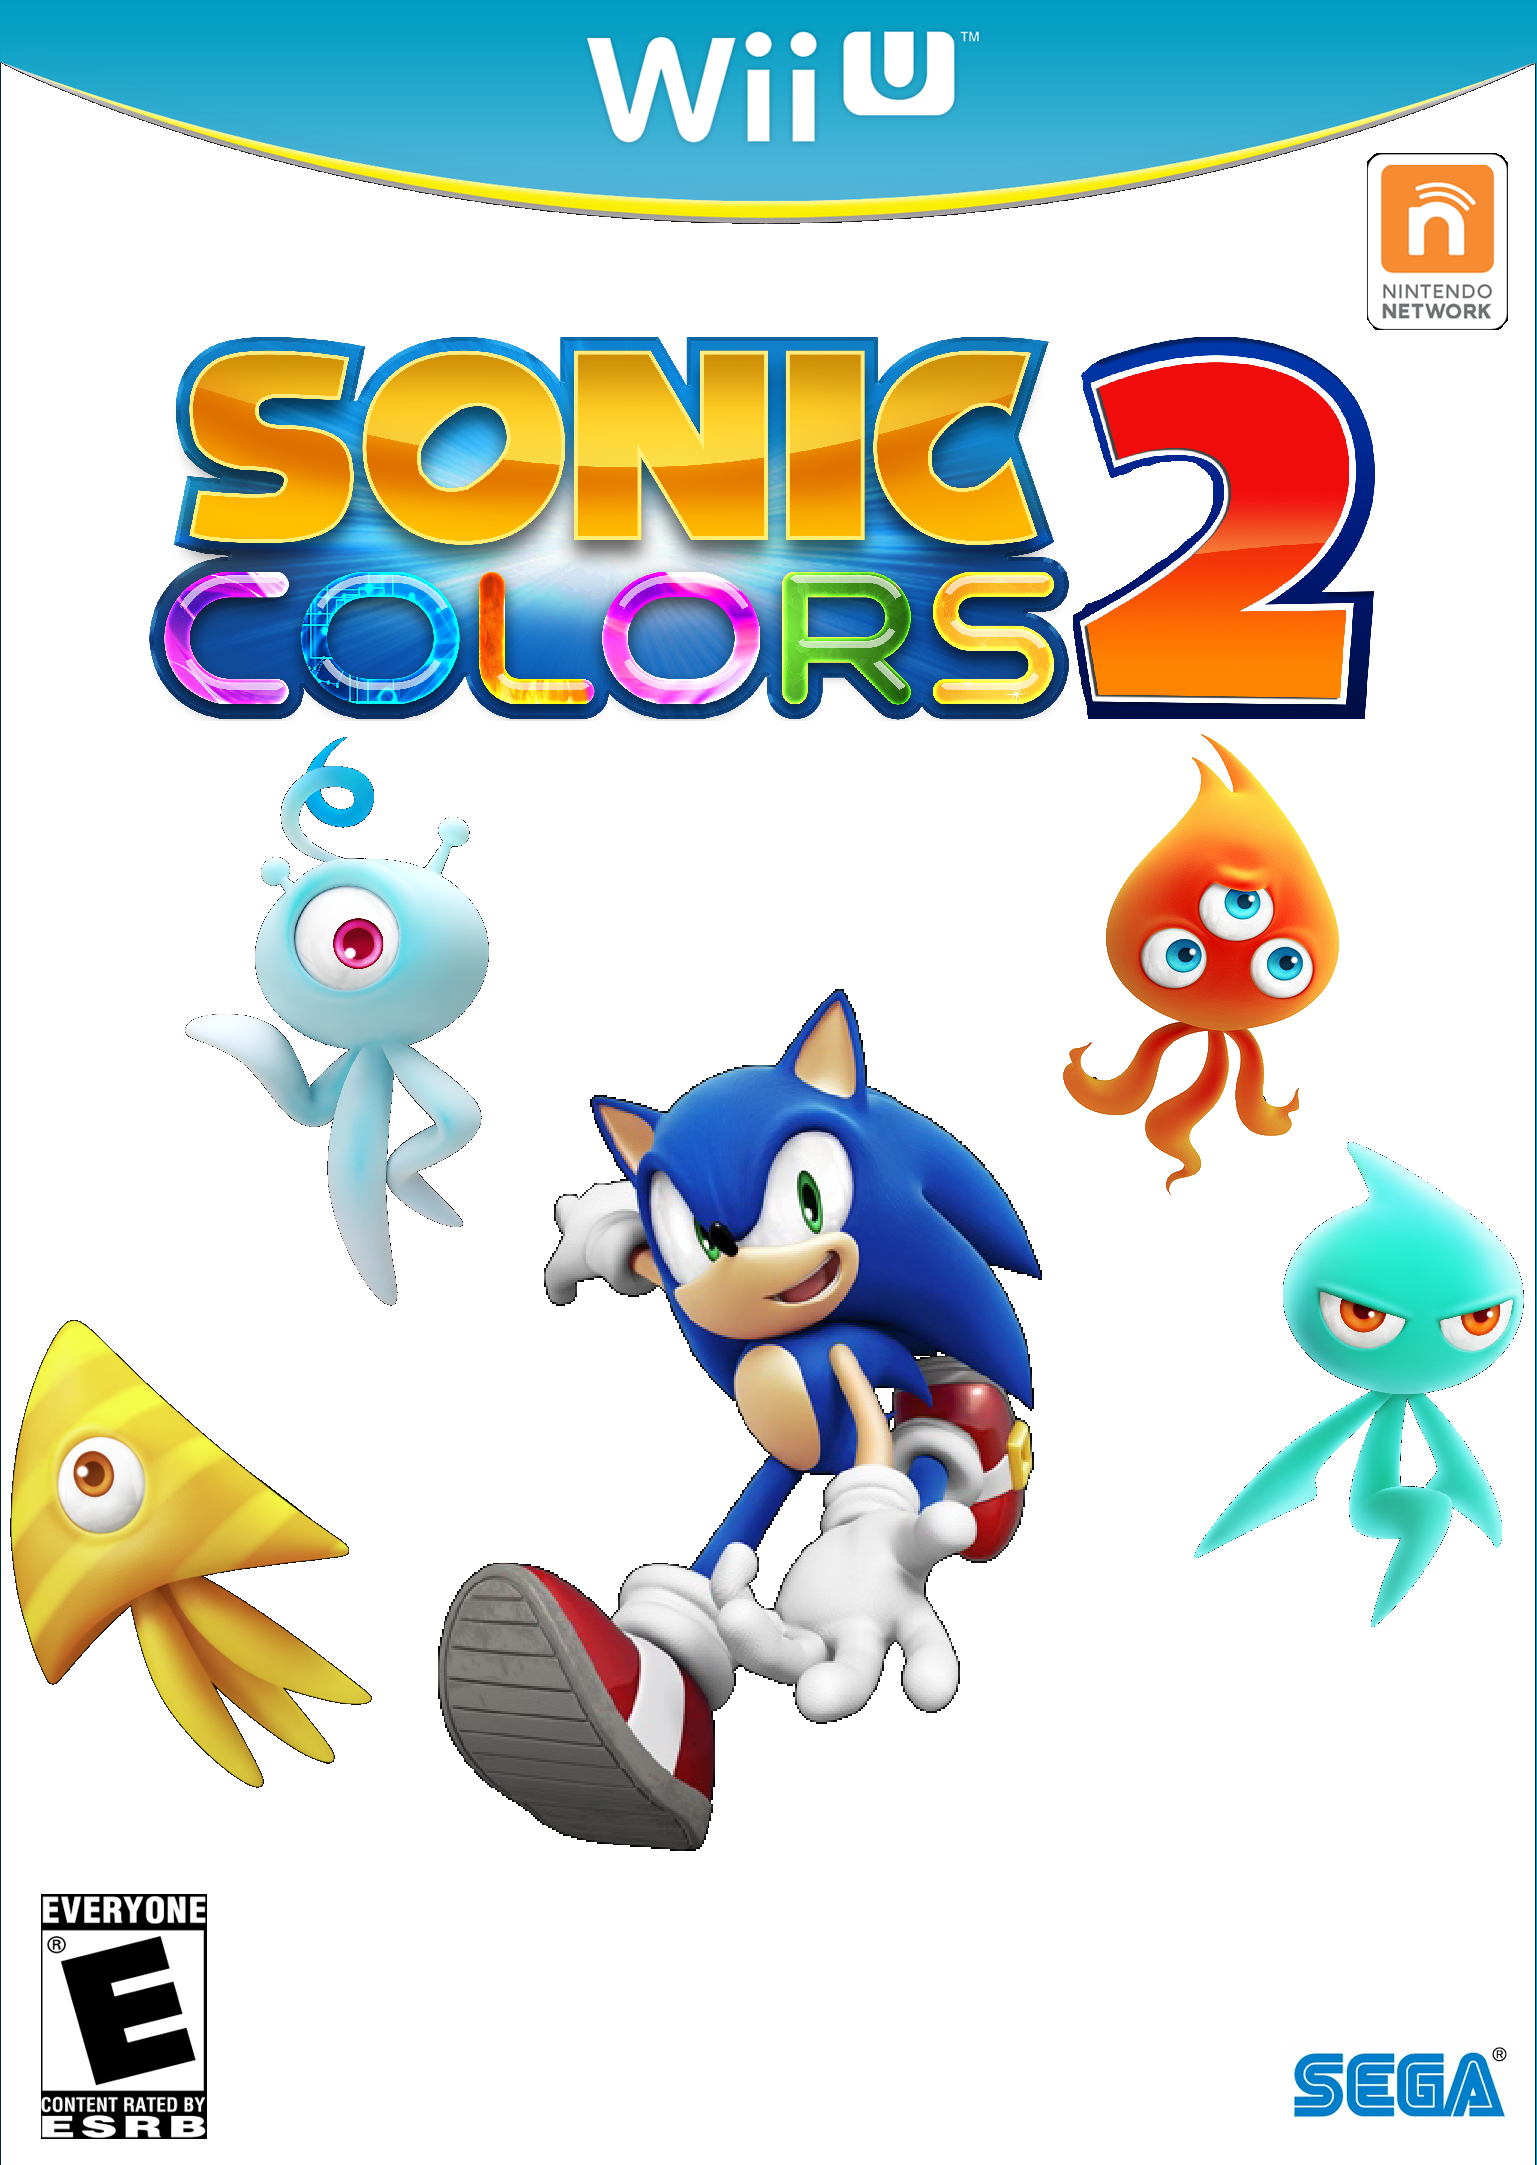 is sonic colors good